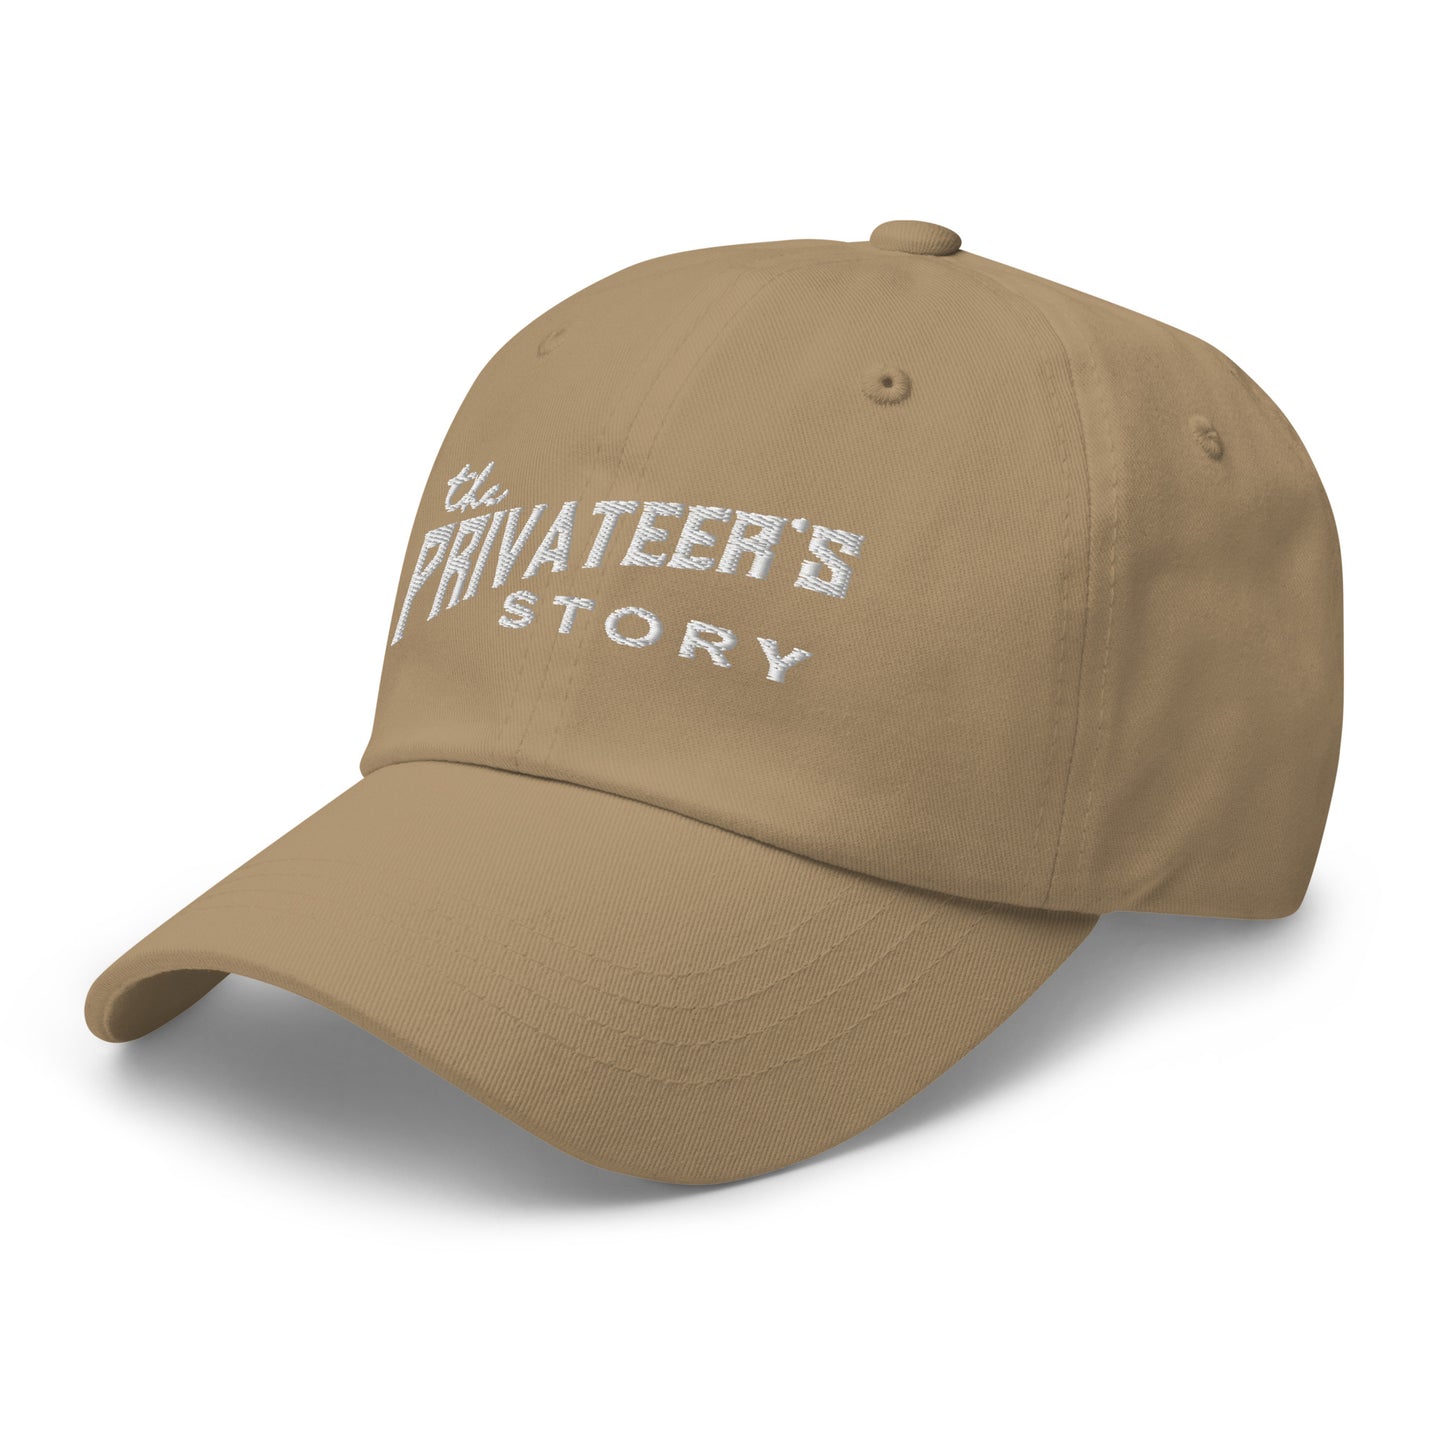 The Privateers Story Dad Hat